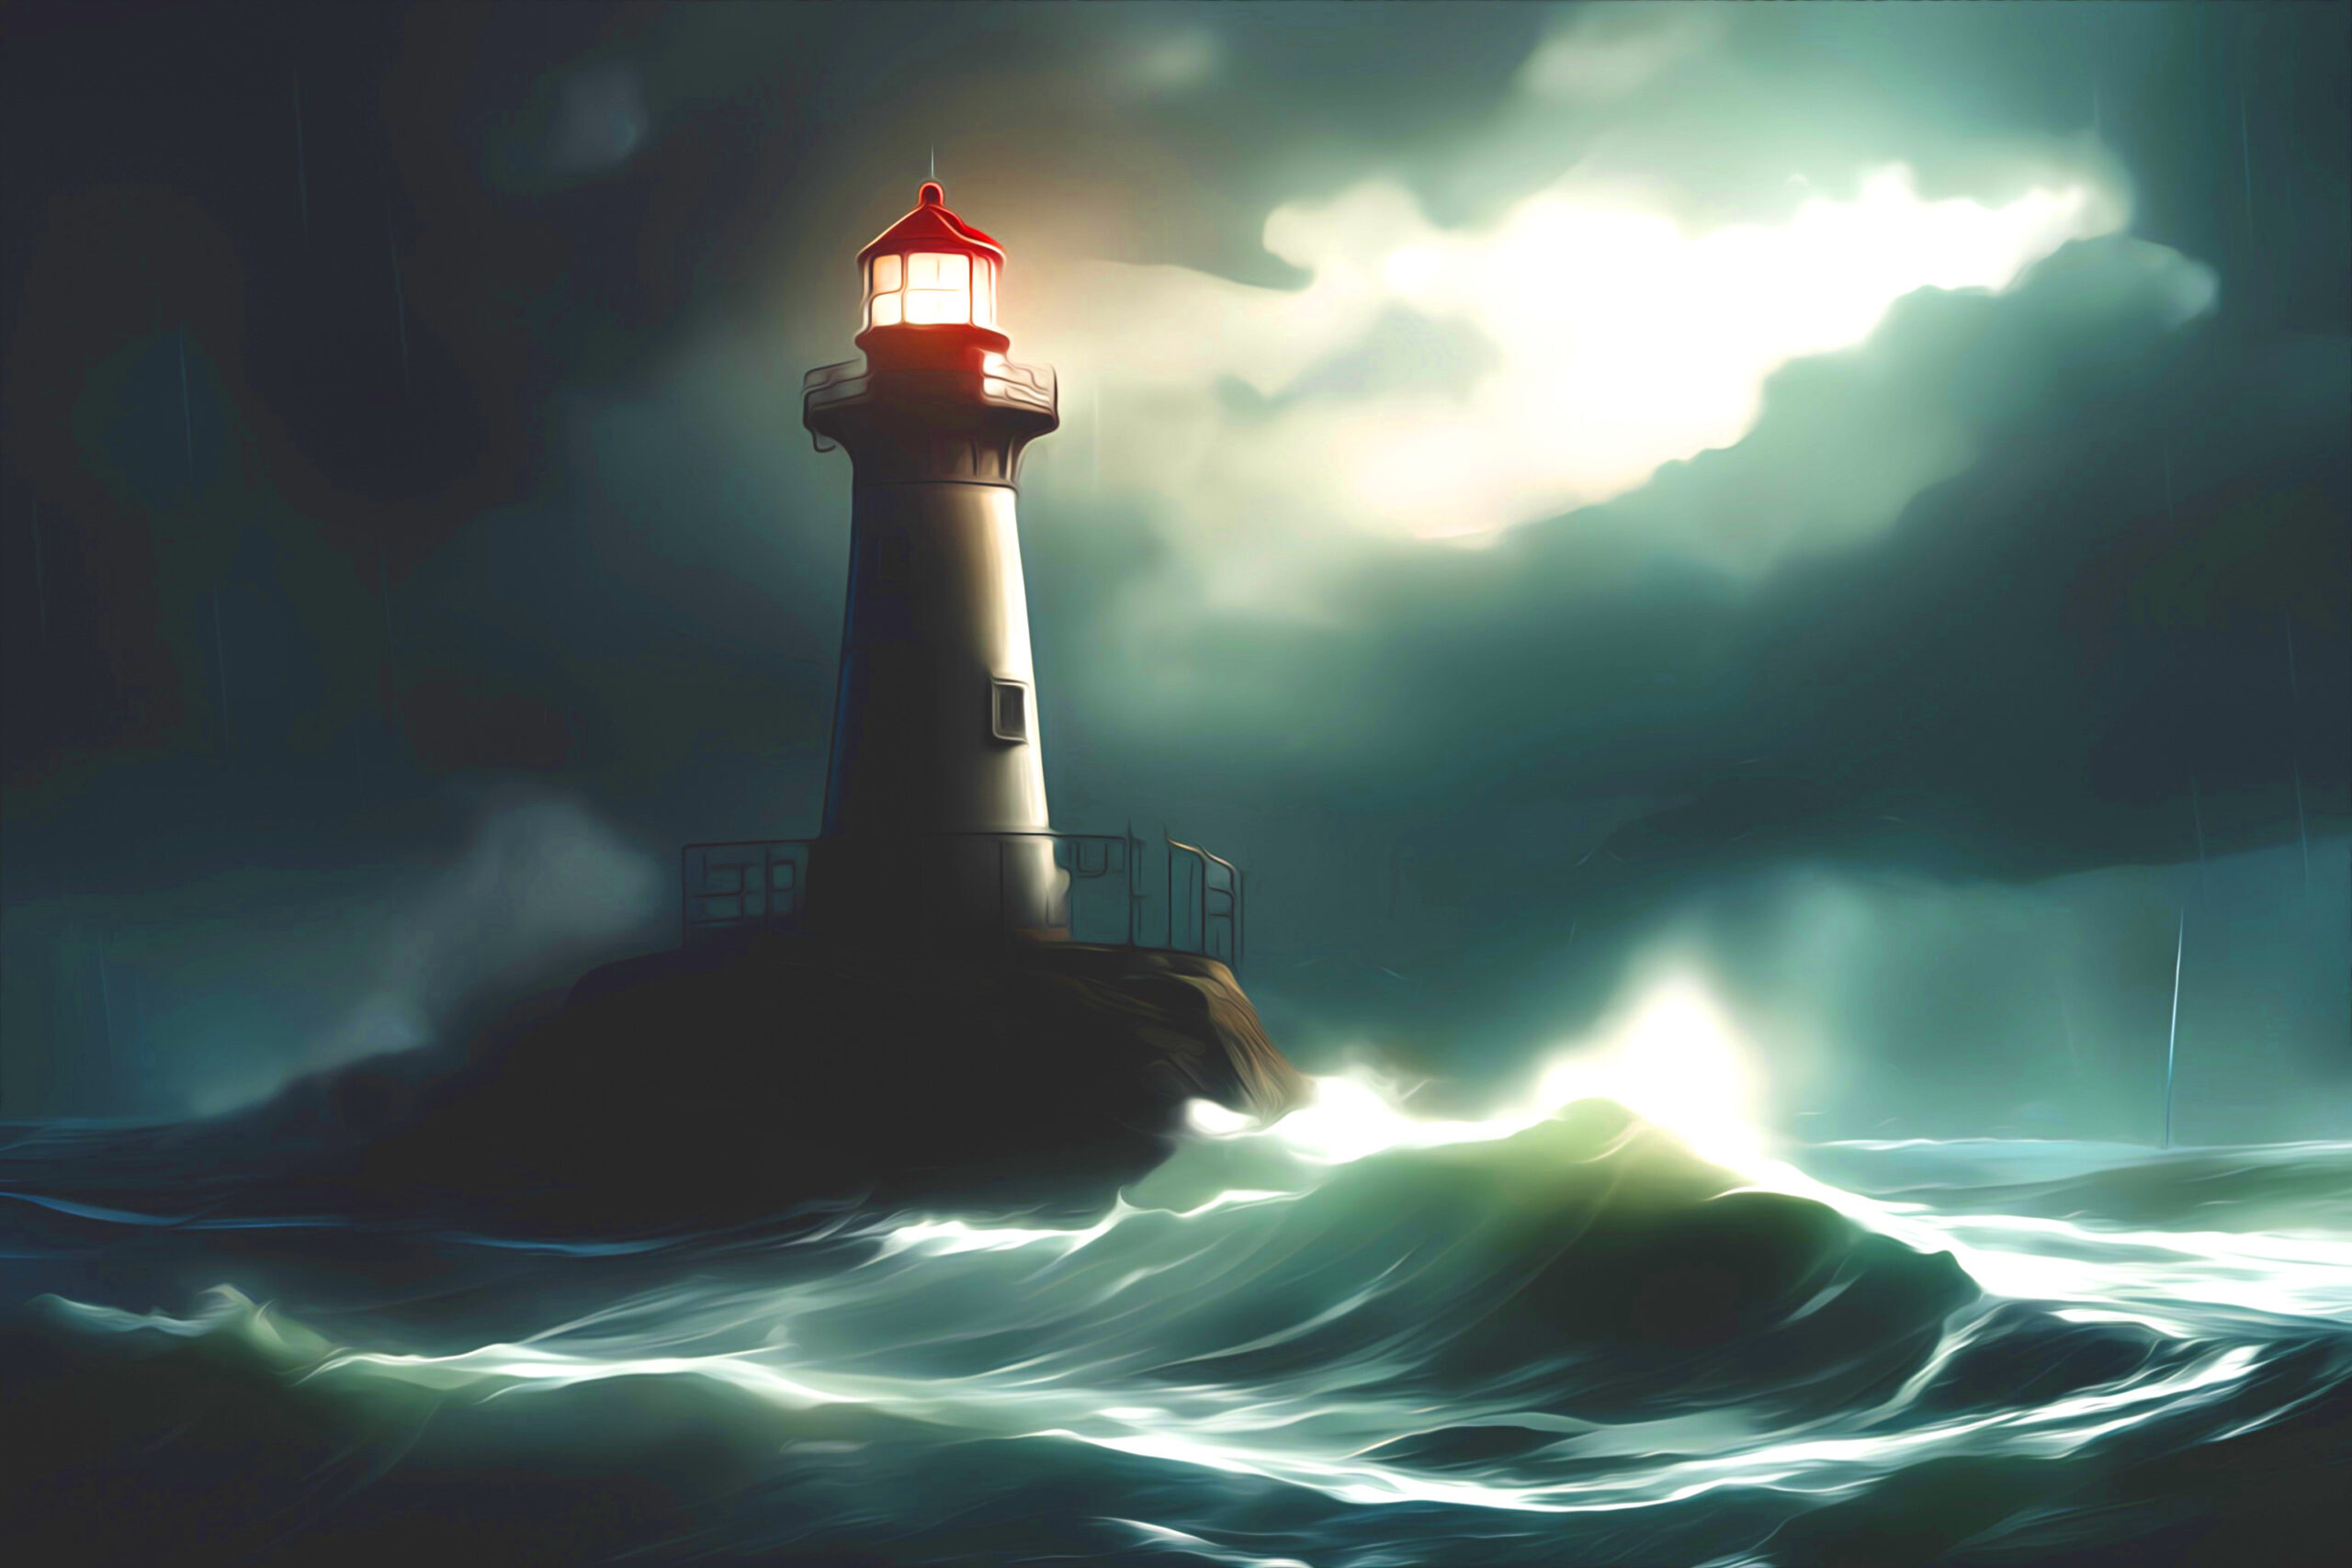 Being a lighthouse